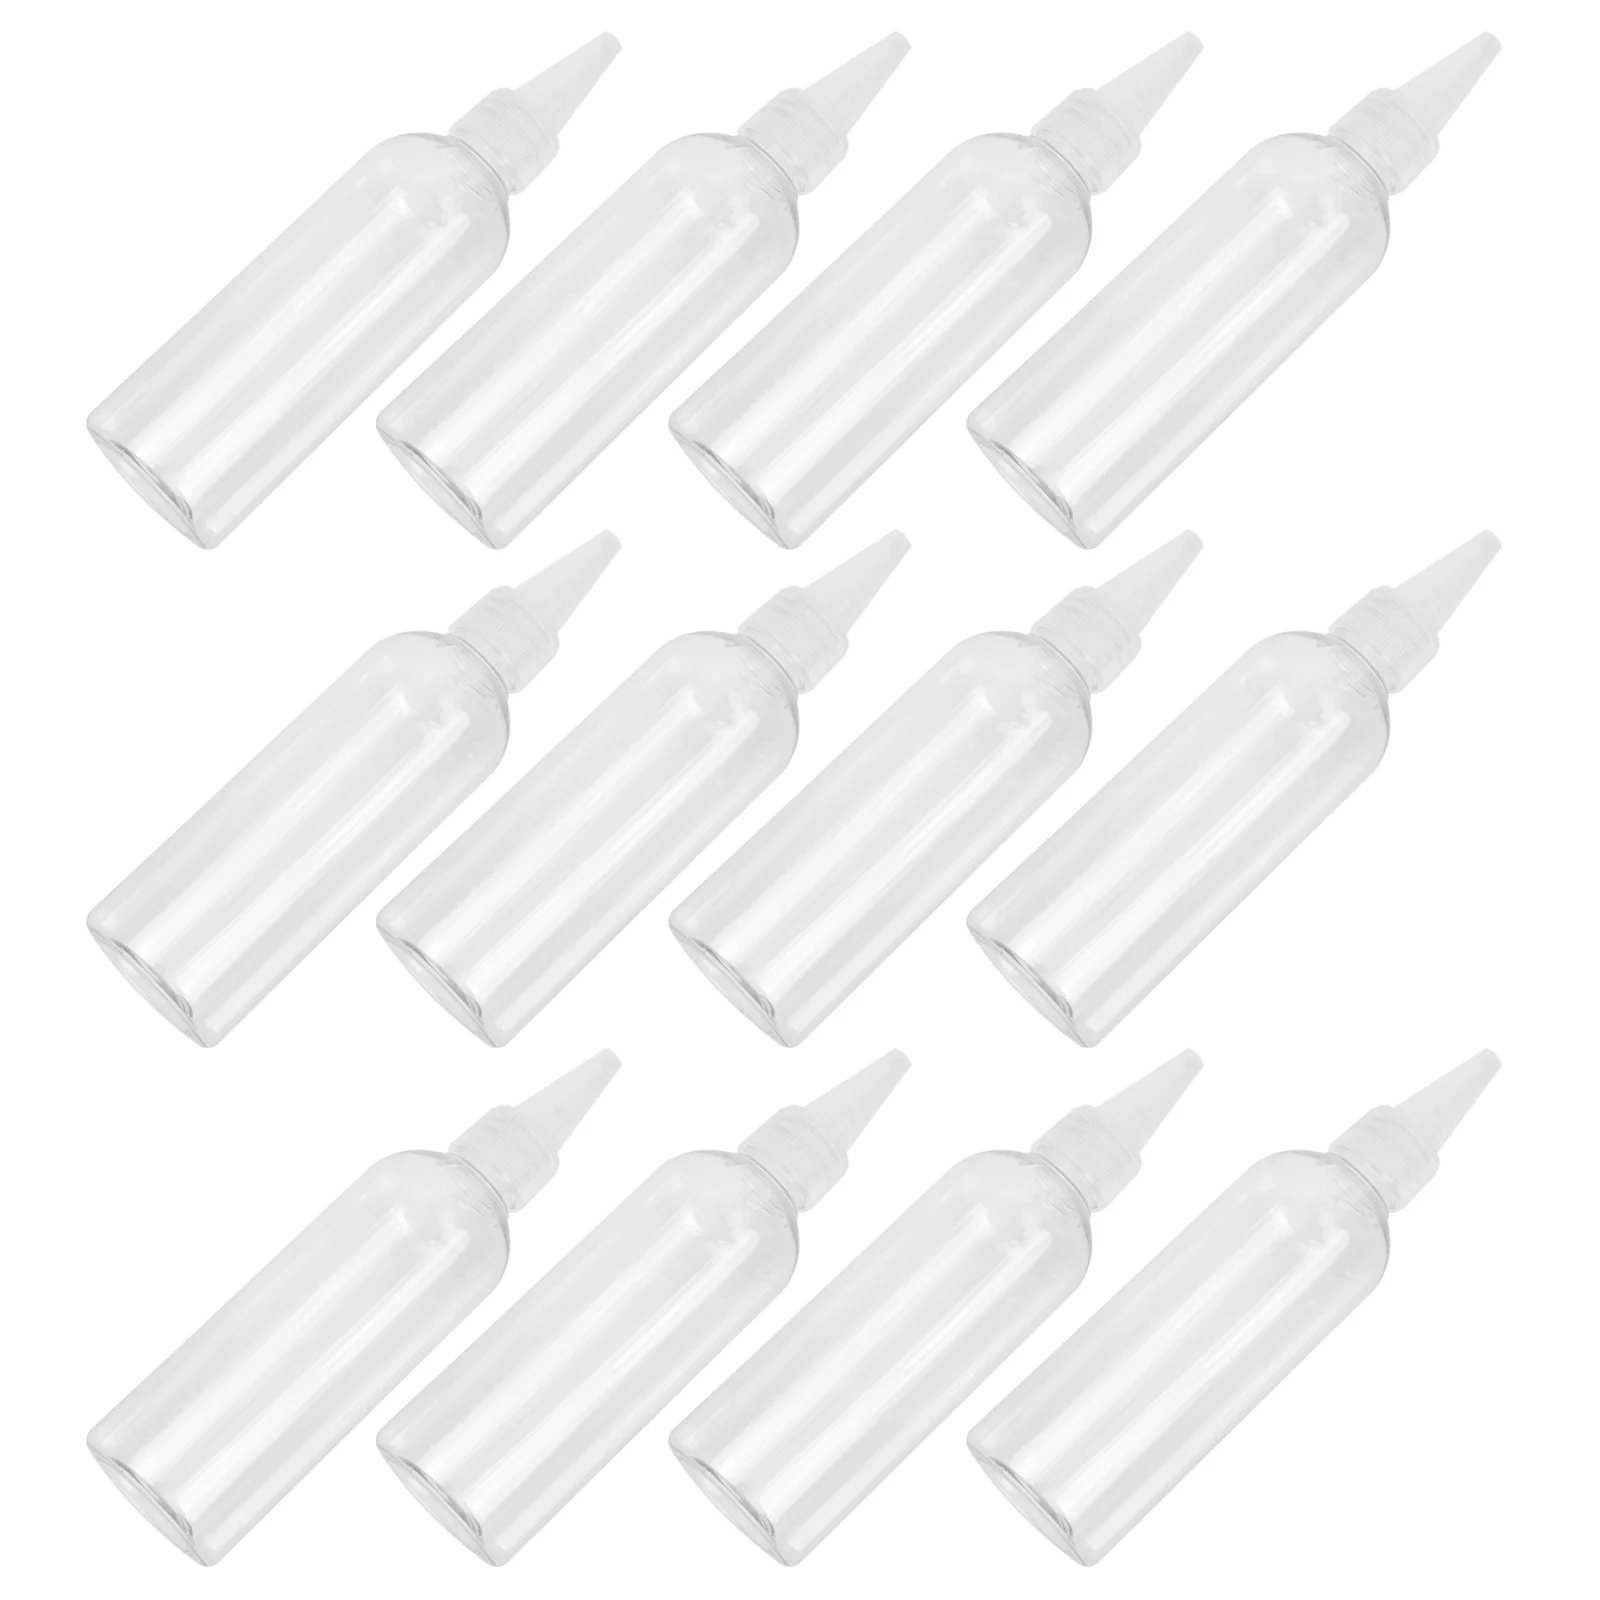 30 Pcs Squeeze Bottle Refillable Hair Dyeing Sauce Containers Sub Squirt Pancake Filling